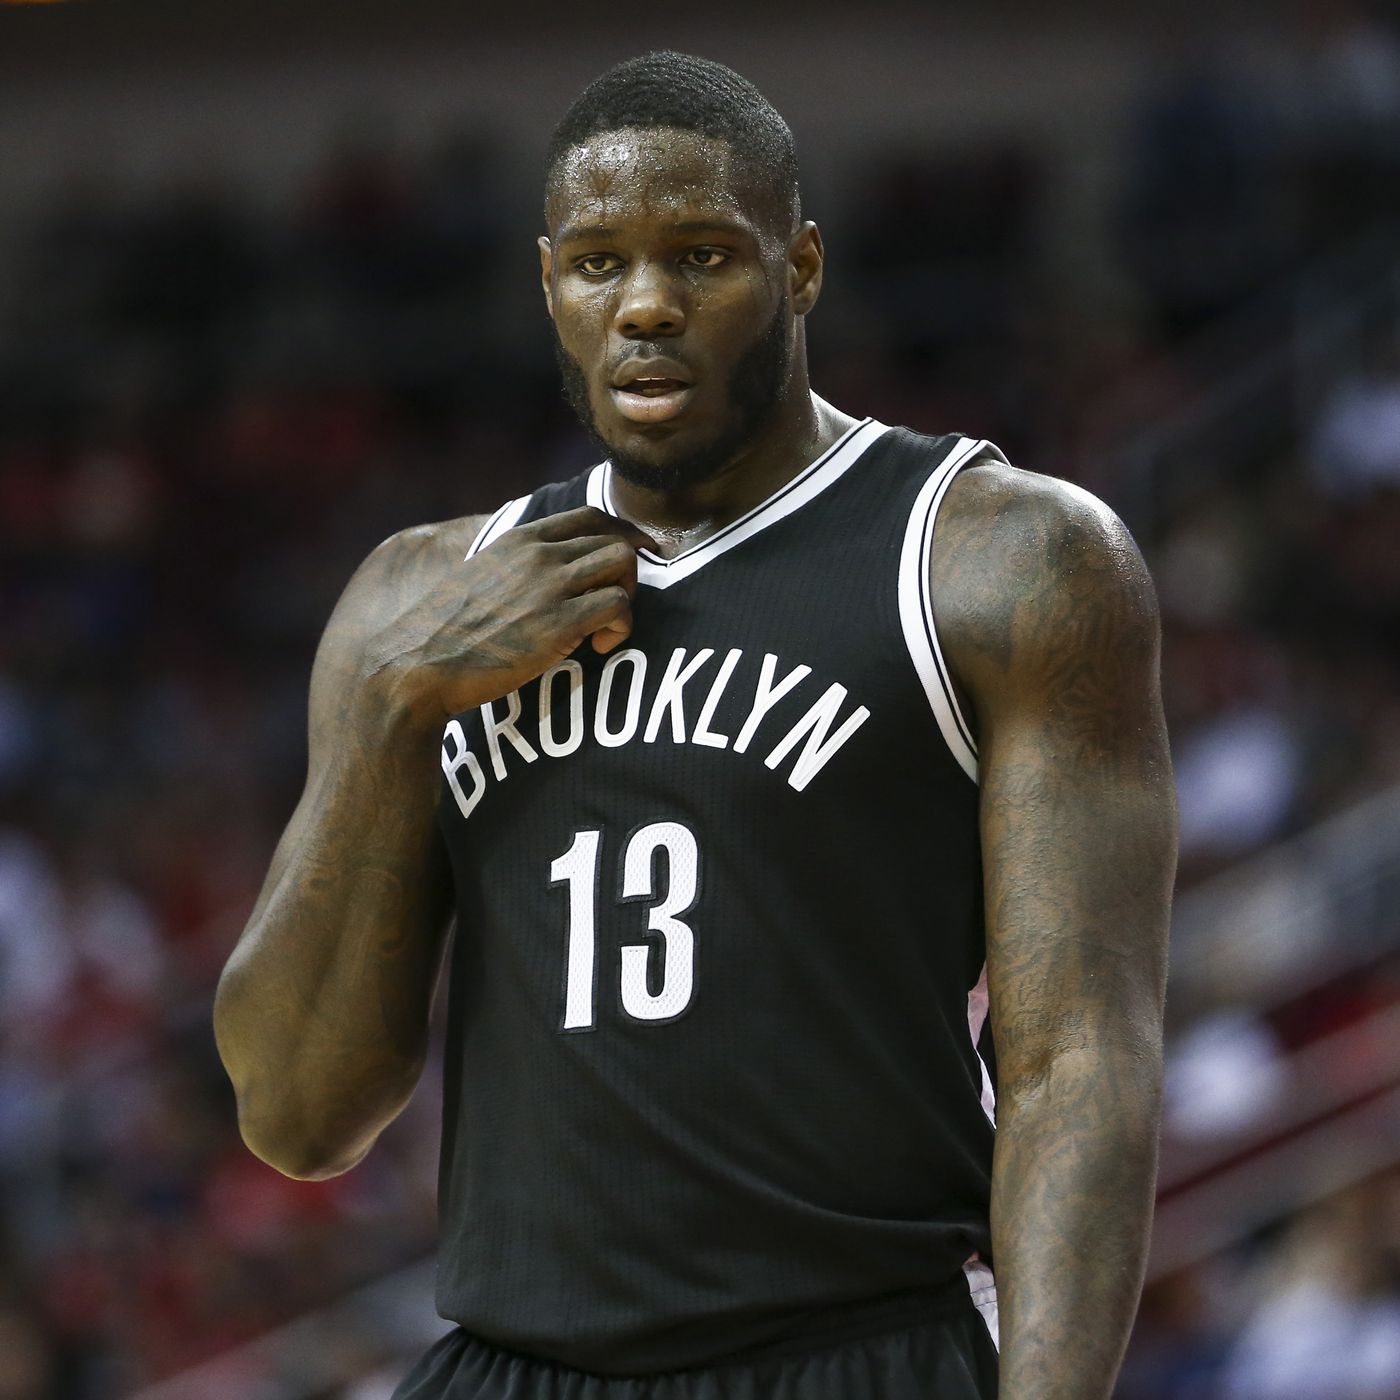 Anthony Bennett in a number 13 black jersey of the Brooklyn Nets